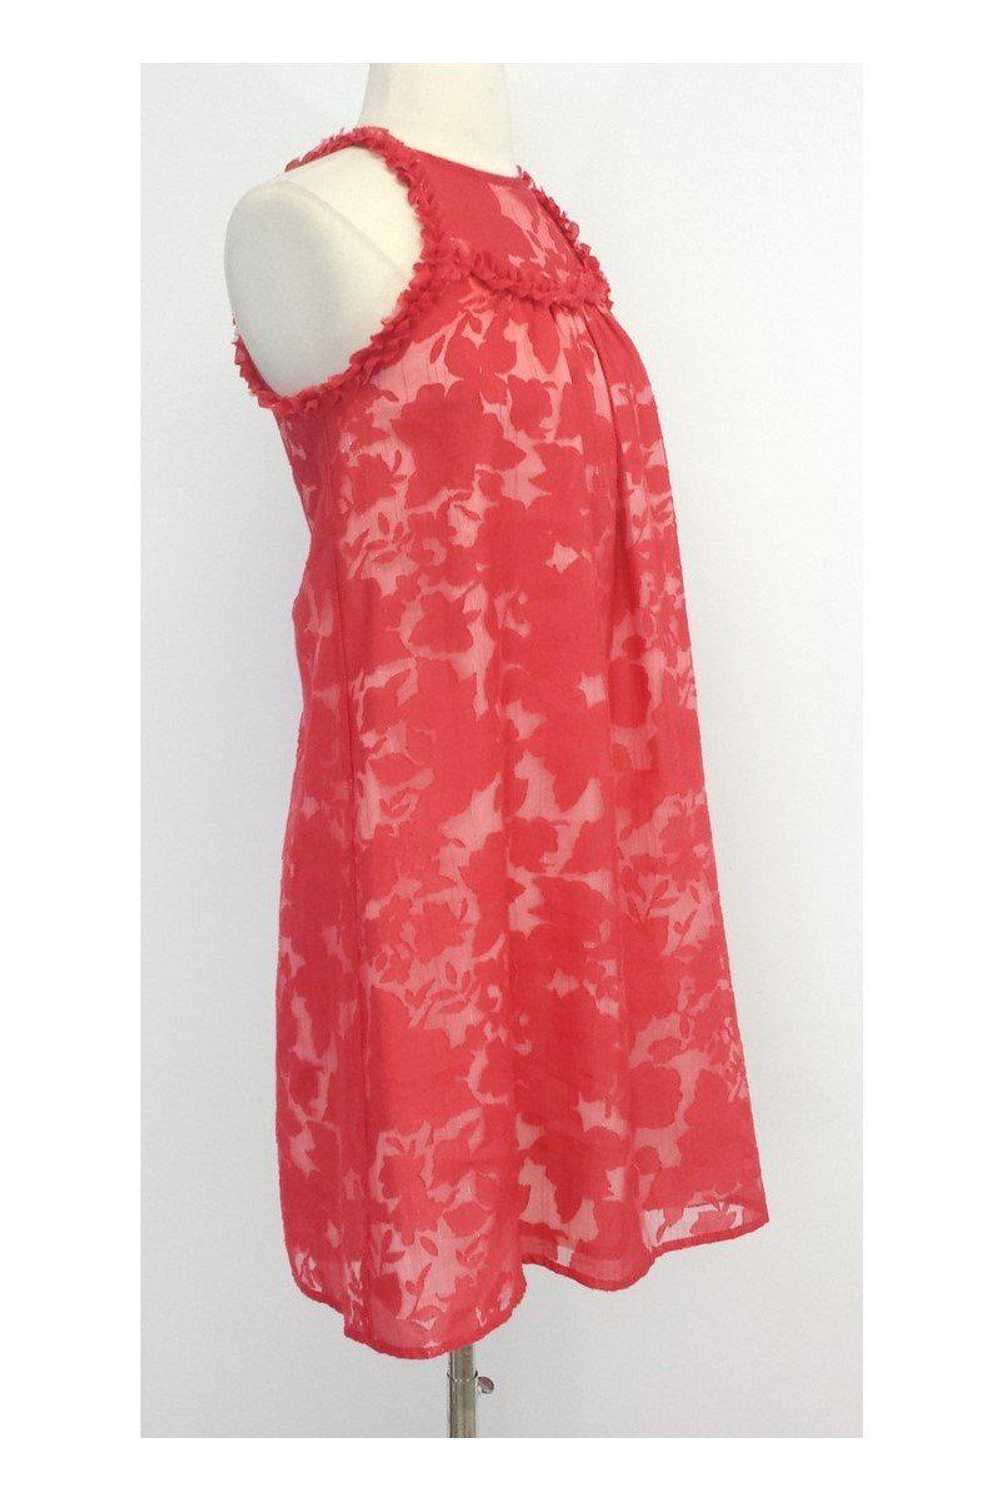 Christopher Deane - Red Floral Print Lace Dress S… - image 2